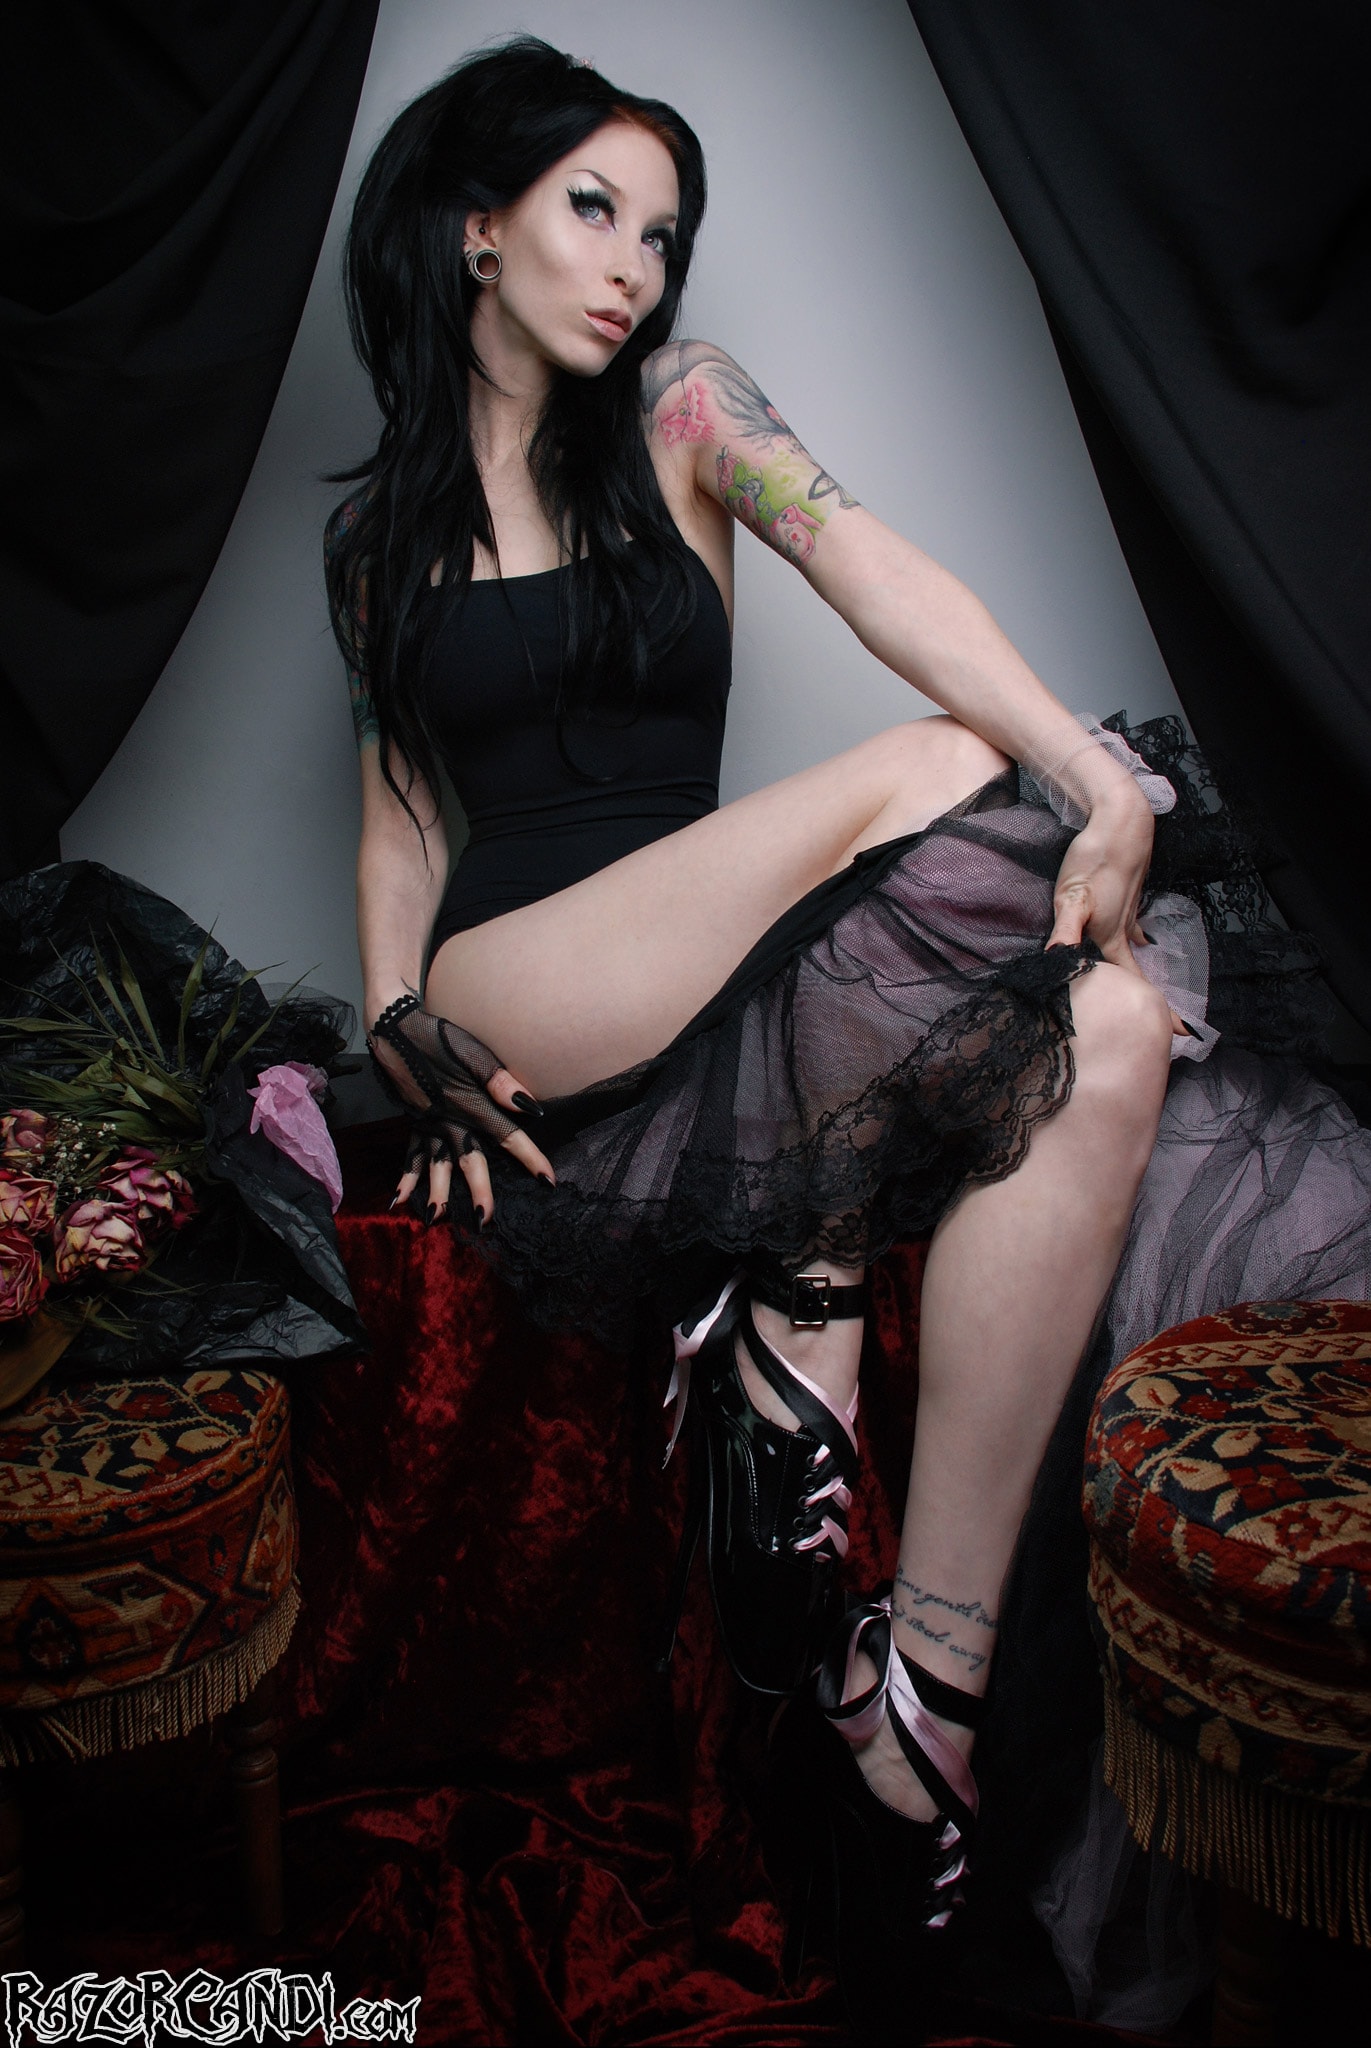 Razor Candi - Leggy Gothic babe in sexy fetish ballet shoes | Picture (5)